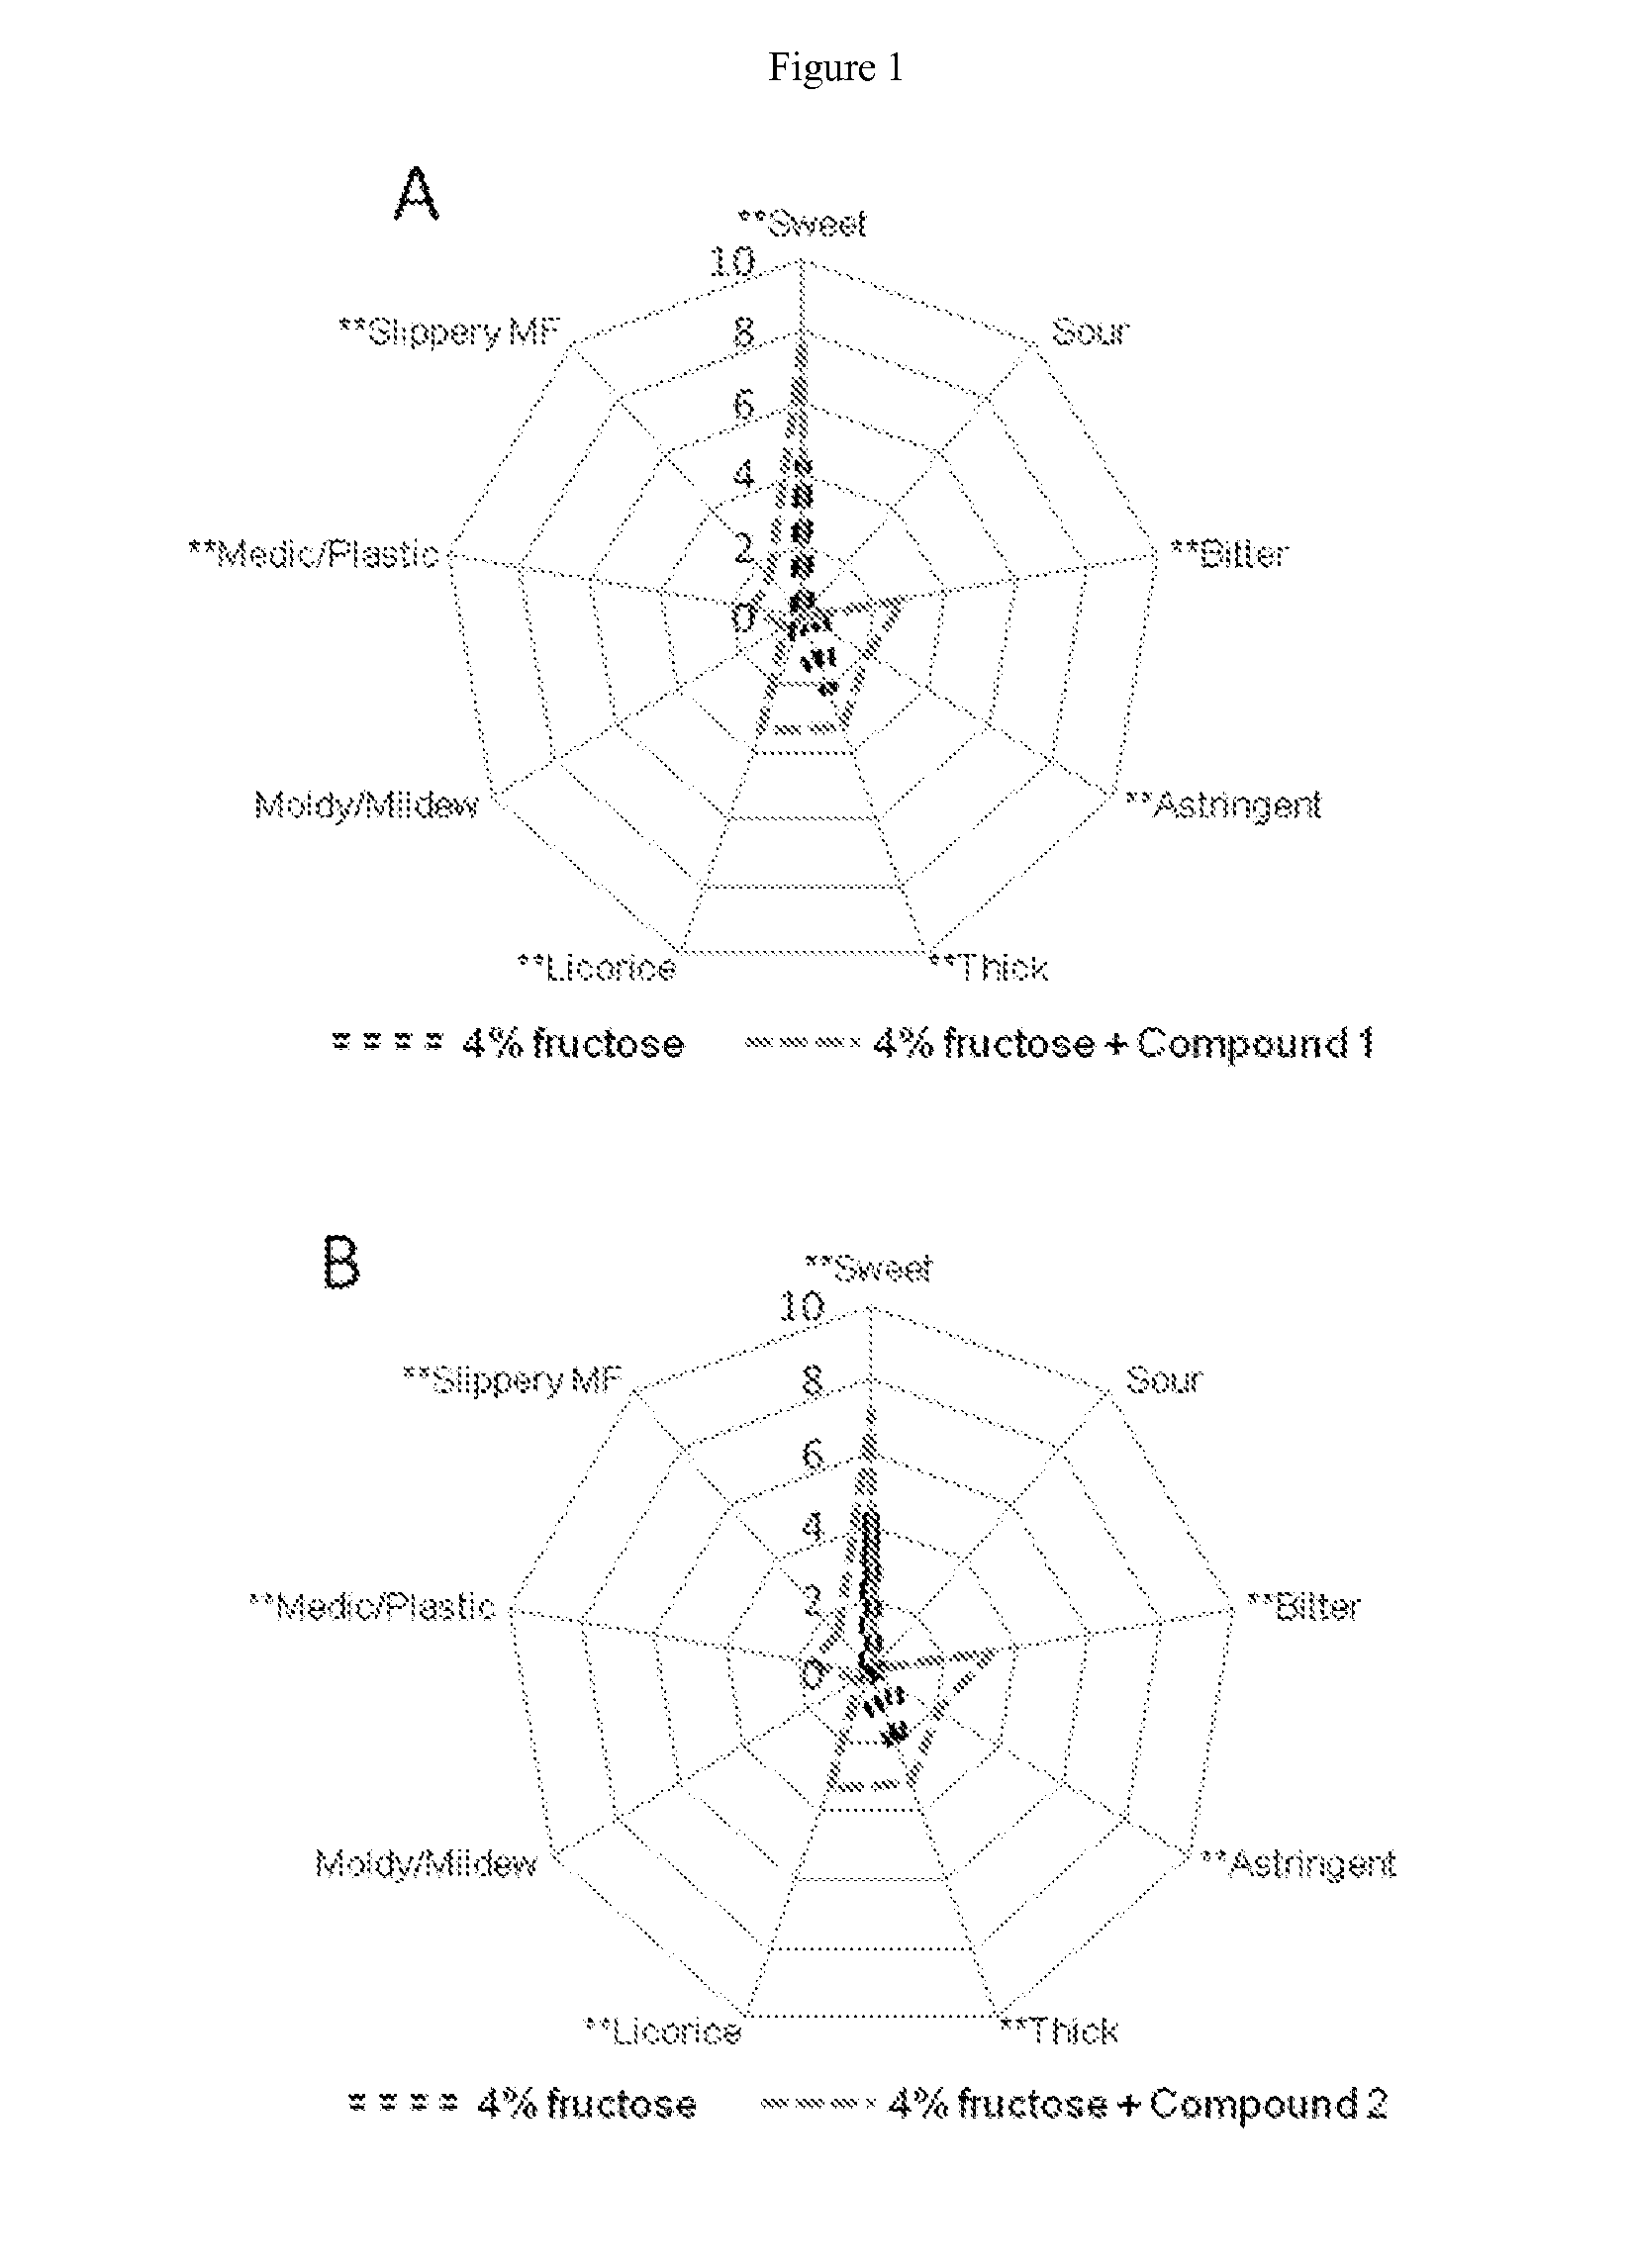 Compounds, compositions, and methods for modulating sweet taste